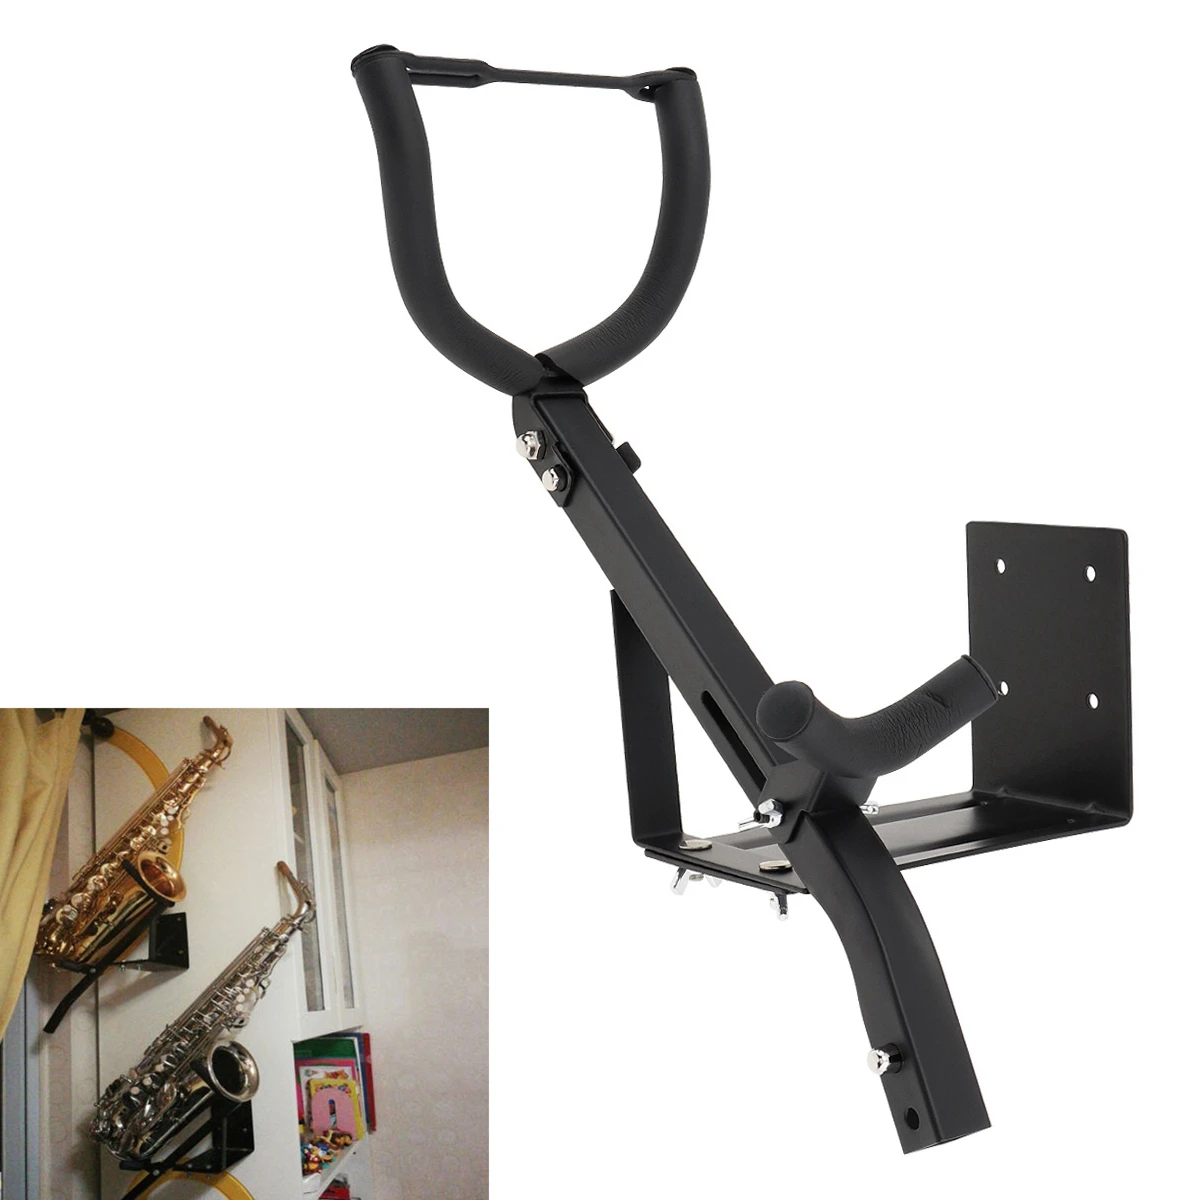 Alto Saxophone Wall Mount Holder Hook Stand Complete with Saxophone Mouthpiece Patches Pads ClausHavn 